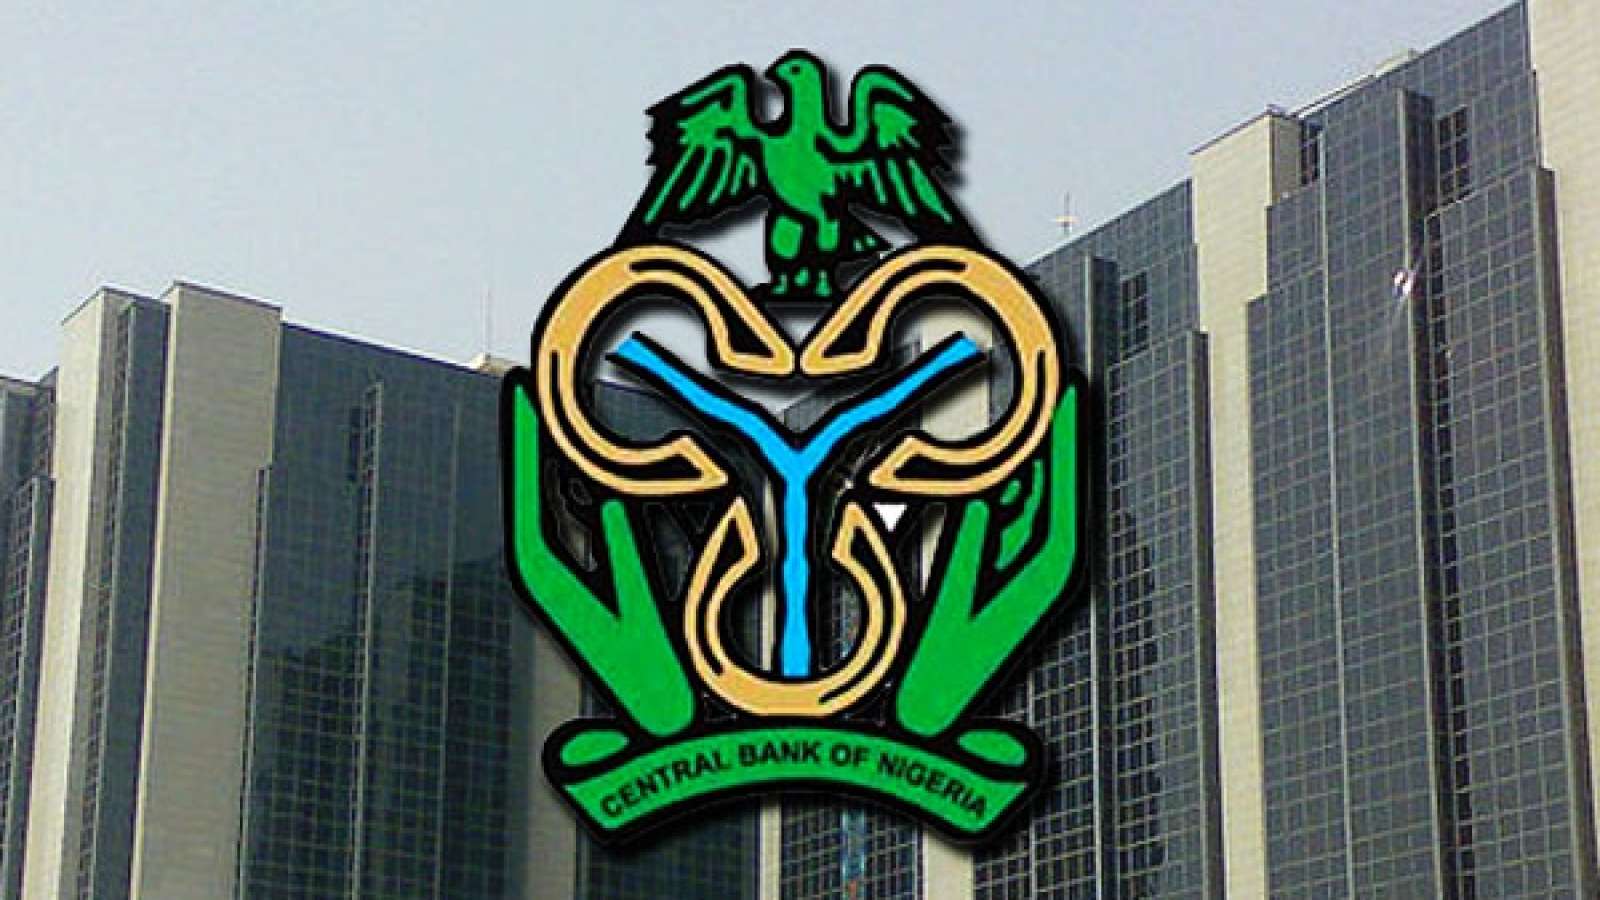 FG Spent N912.32bn To Service CBN Loan In 3 Months – Report